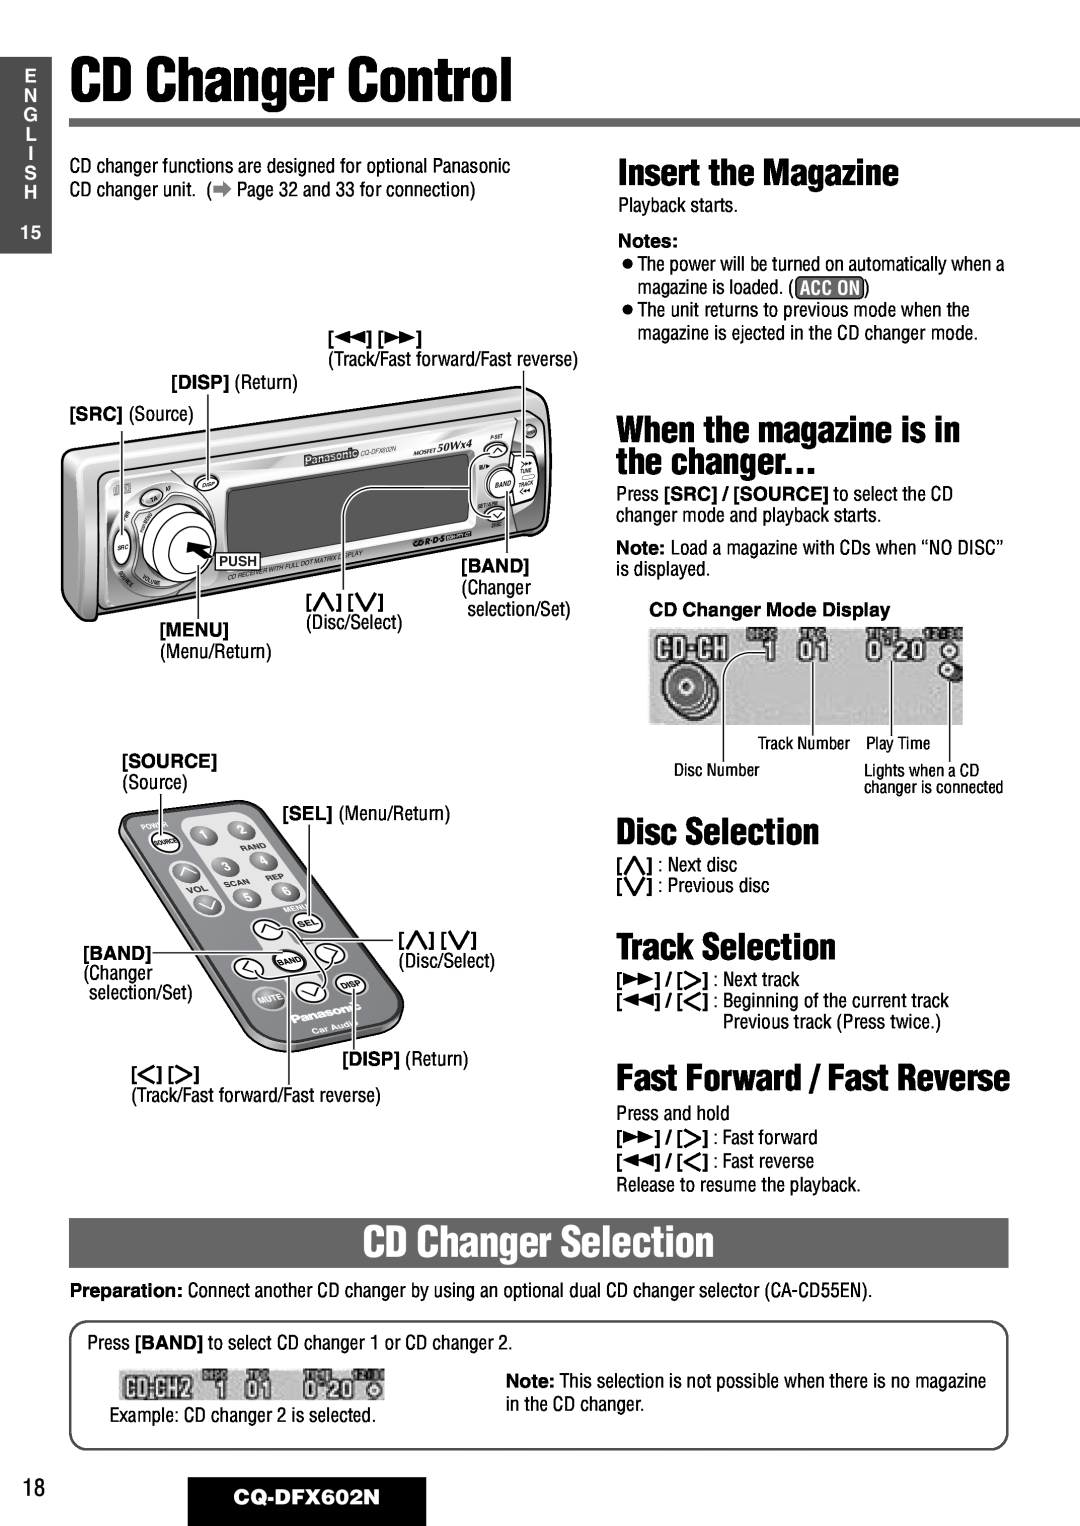 Panasonic CQ-DFX602N manual CD Changer Selection, Insert the Magazine, When the magazine is in, the changer, Disc Selection 